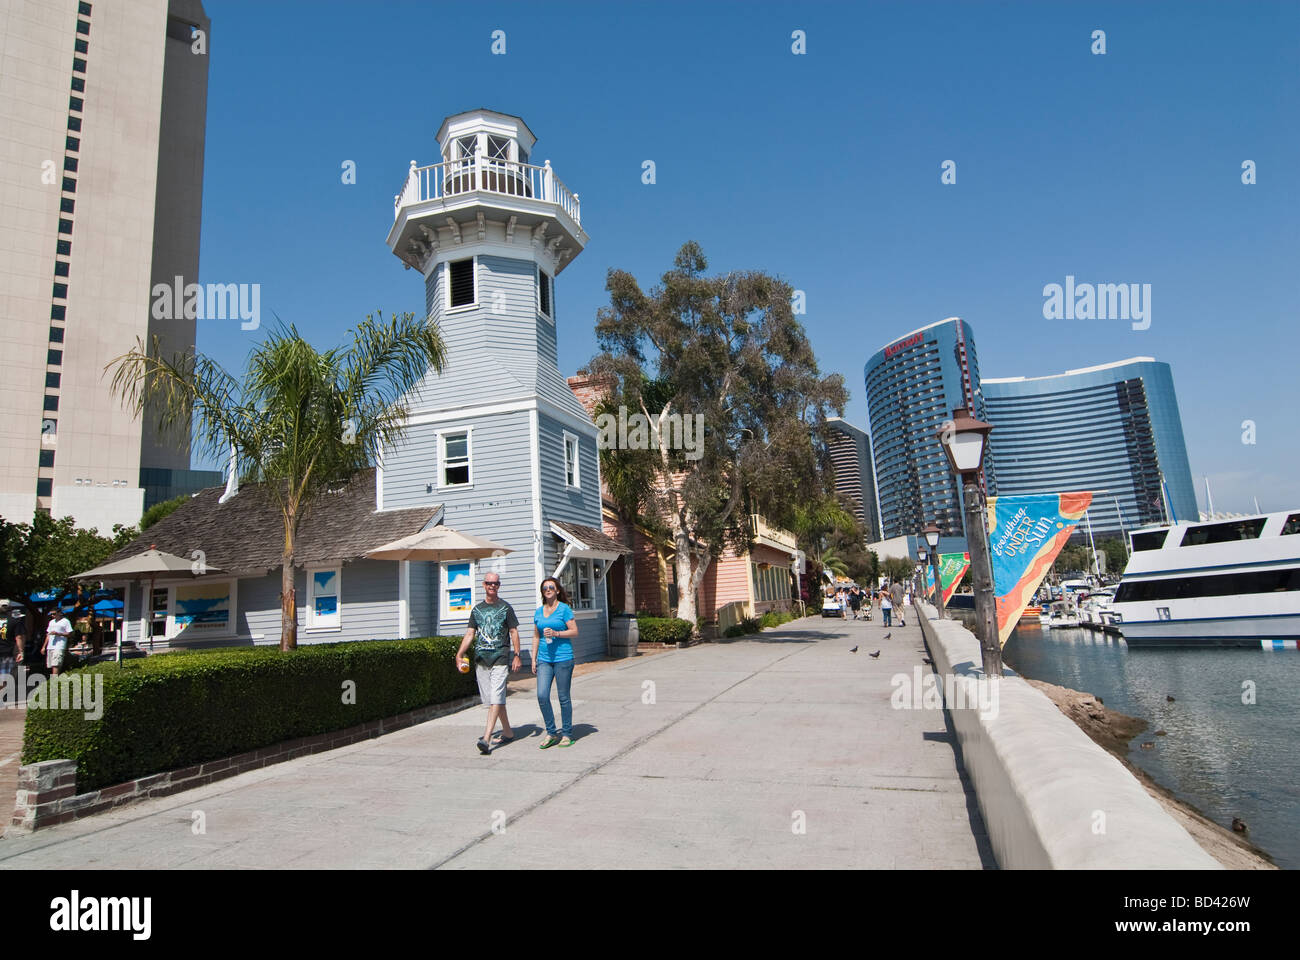 Seaport Village is a shopping and dining complex overlooking the bay in San Diego, California. Stock Photo